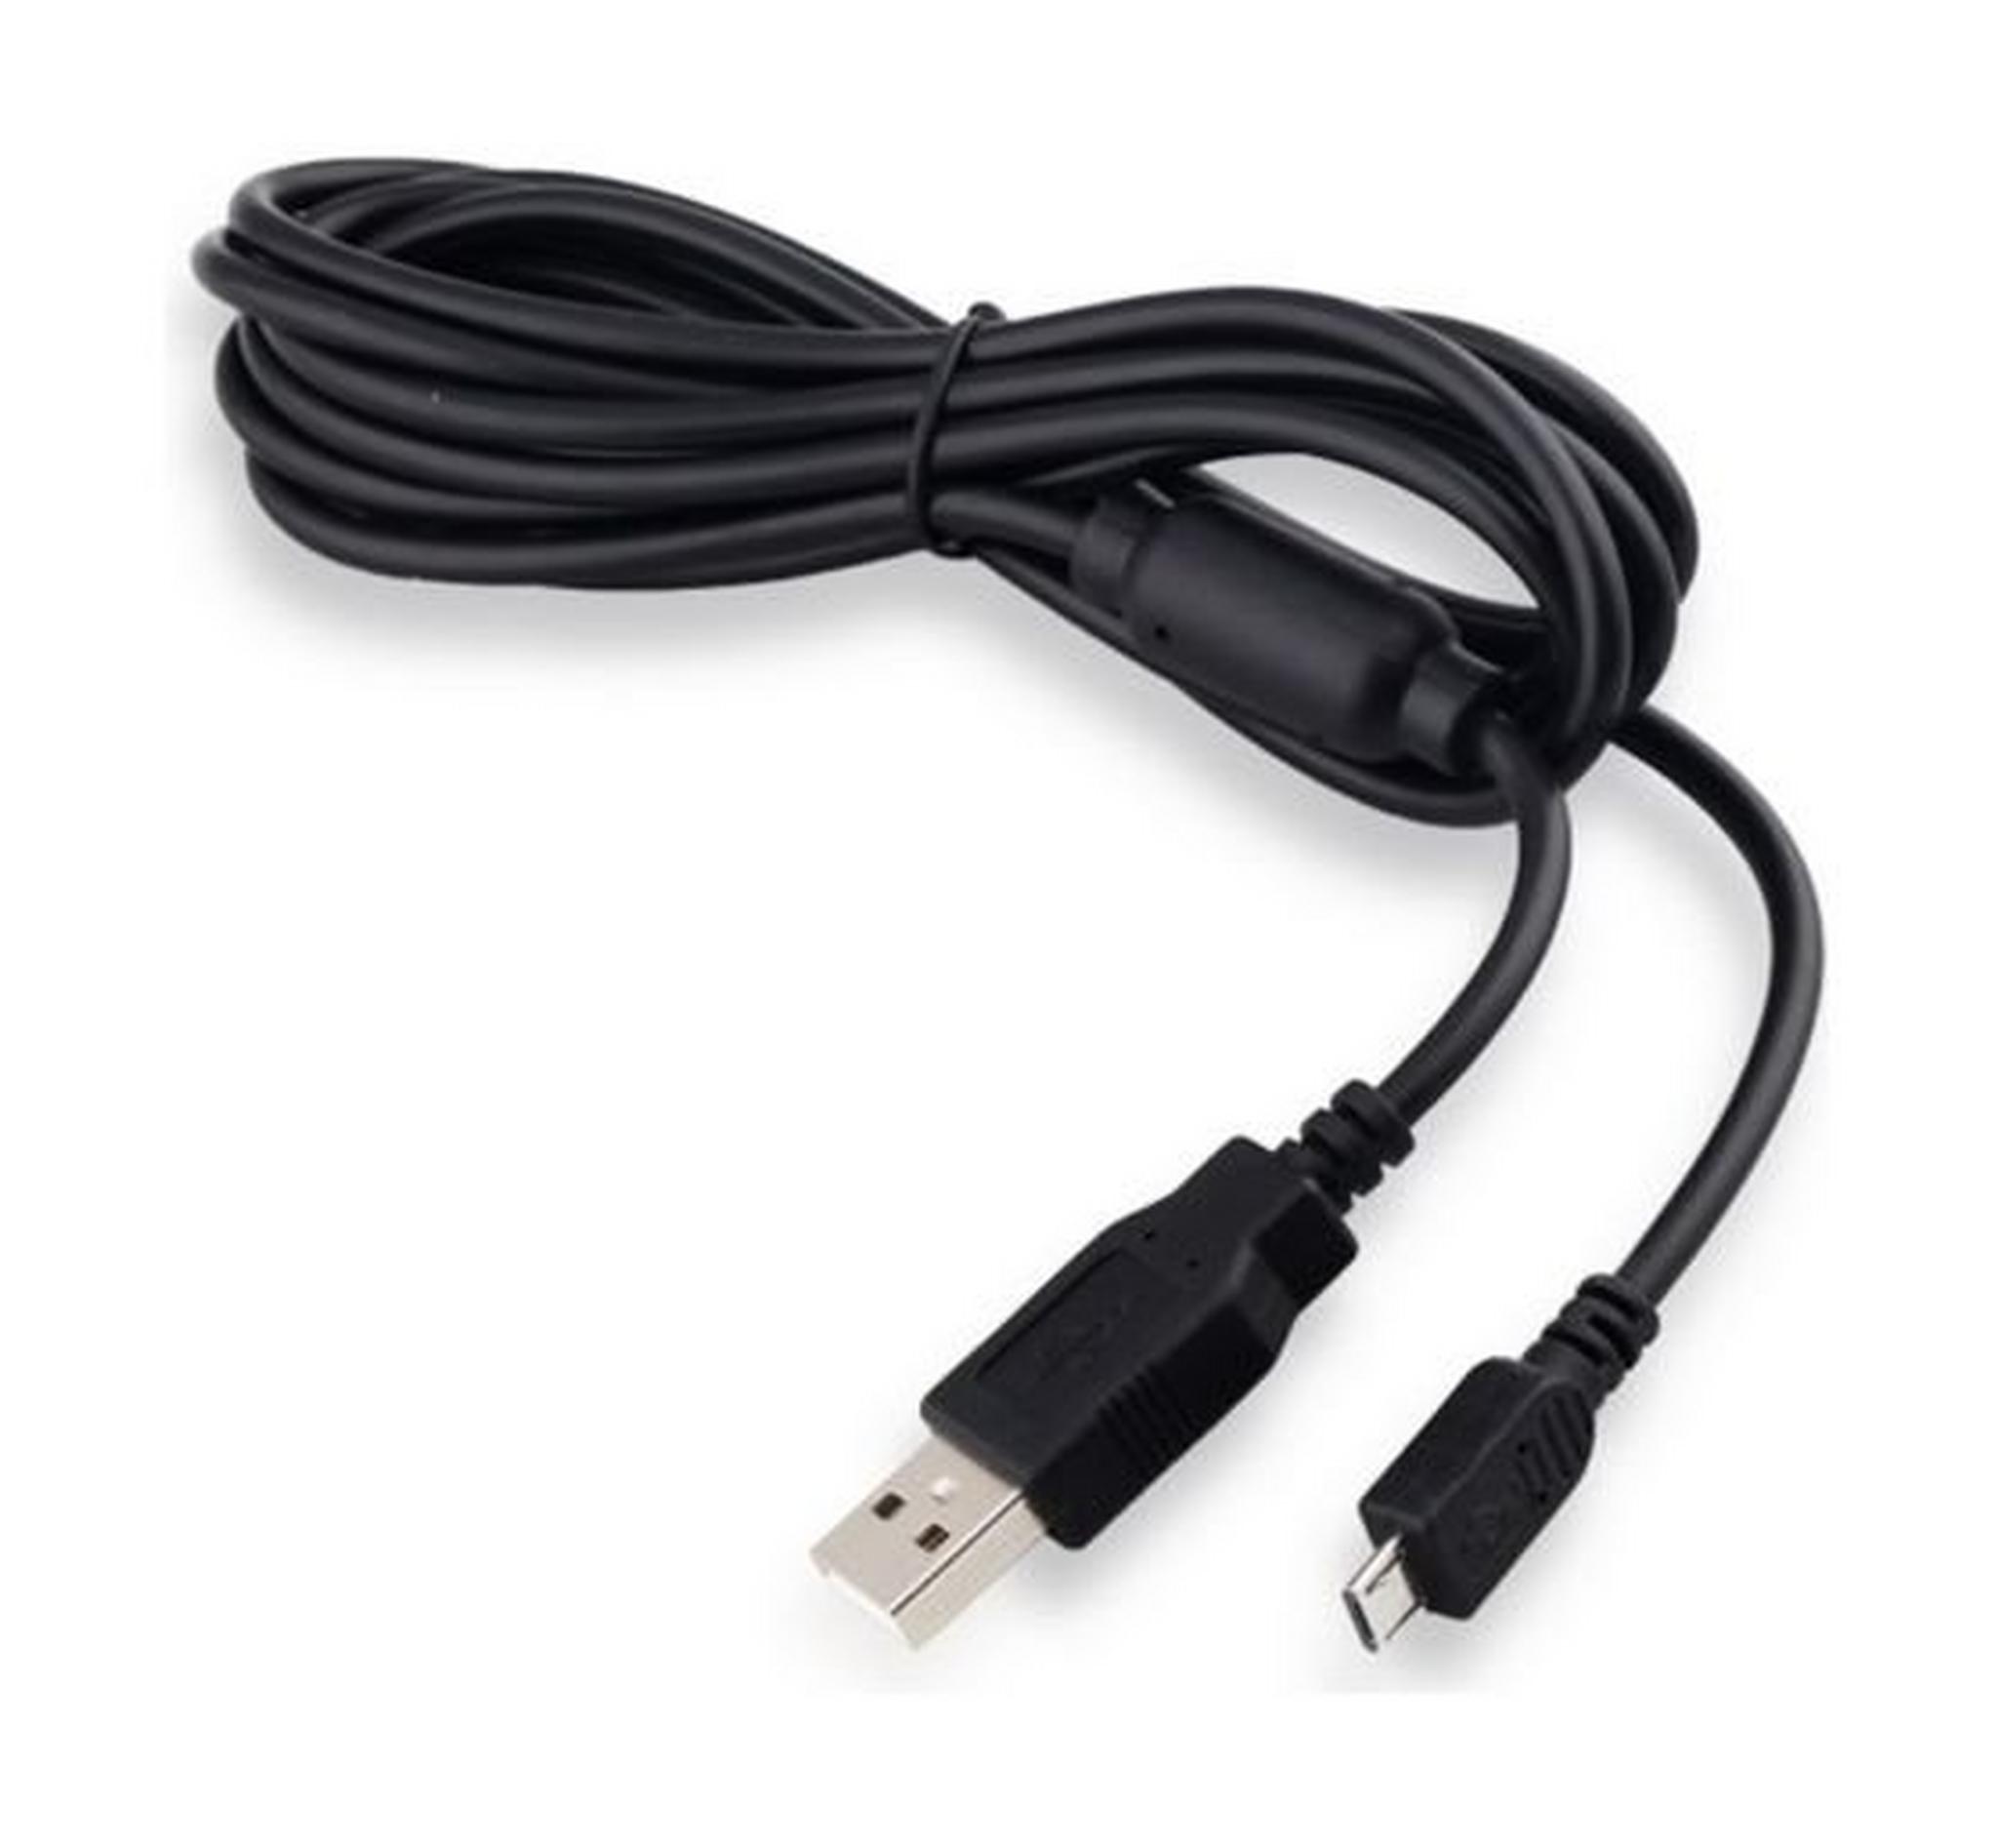 Dobe USB 2.0 Cable For PlayStation 4 - Black